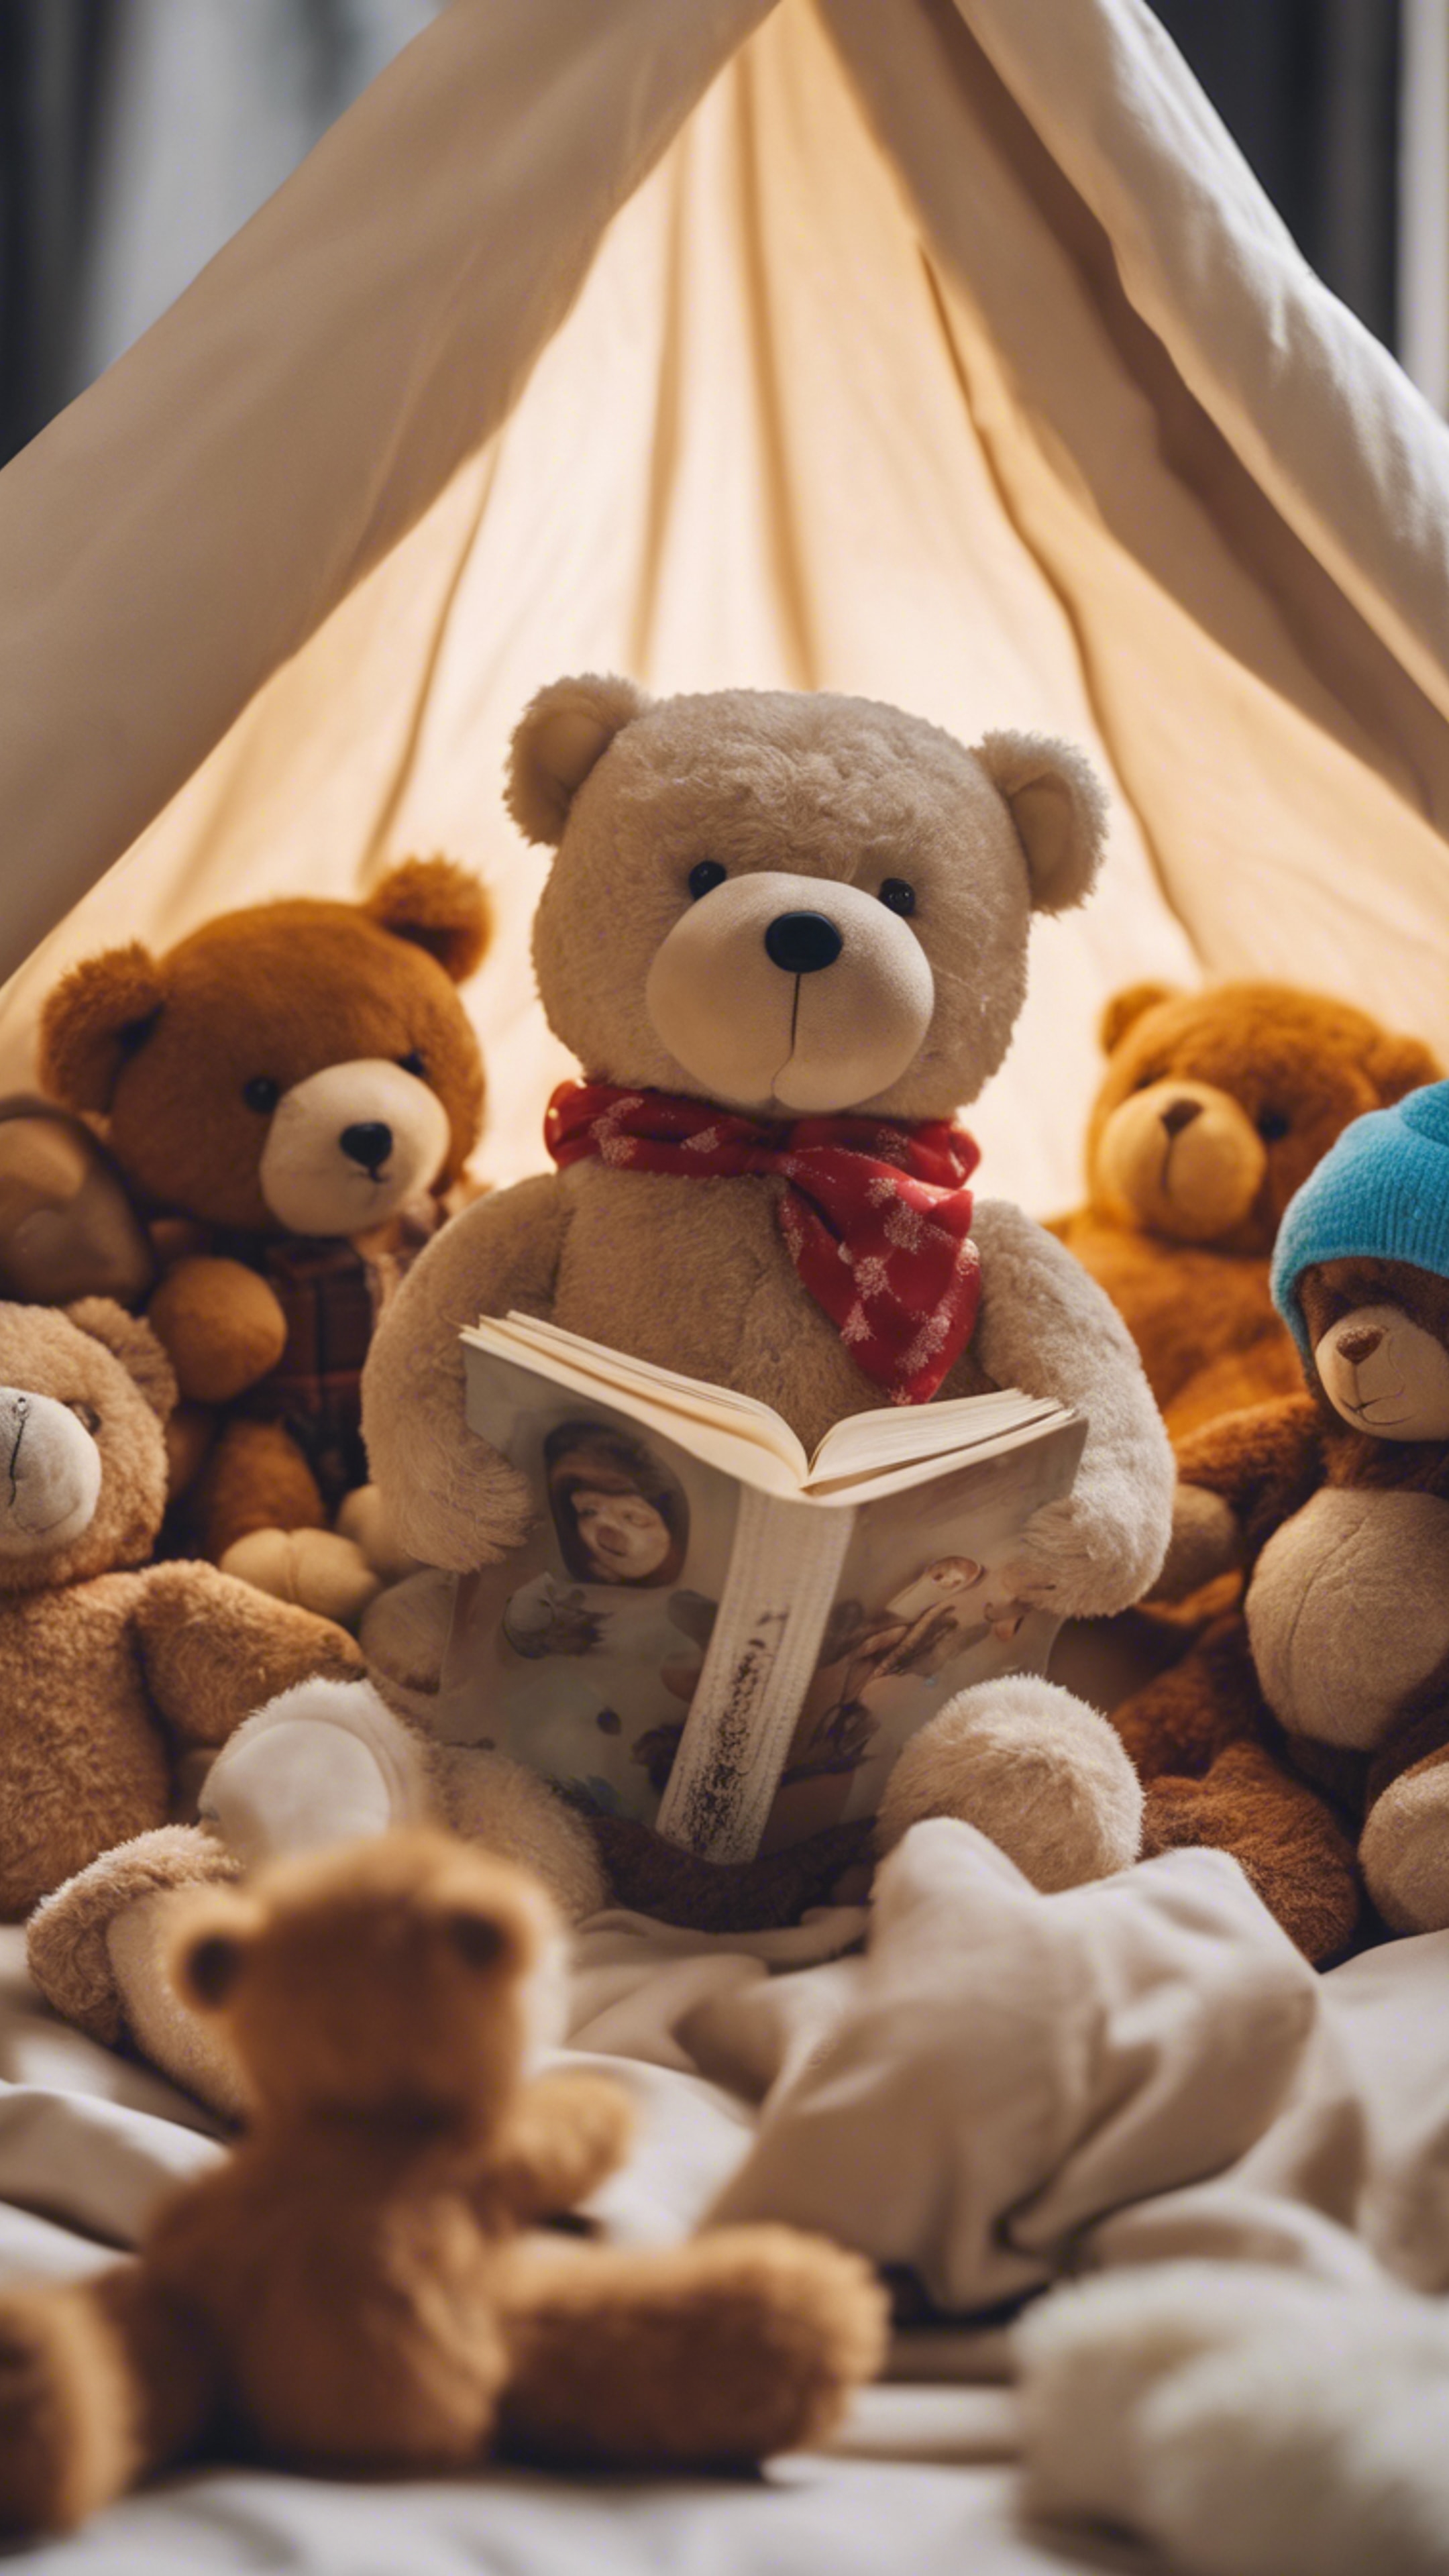 A teddy bear reading a story to a group of animal toys under a blanket fort. Валлпапер[8c29e330caea492dba8f]